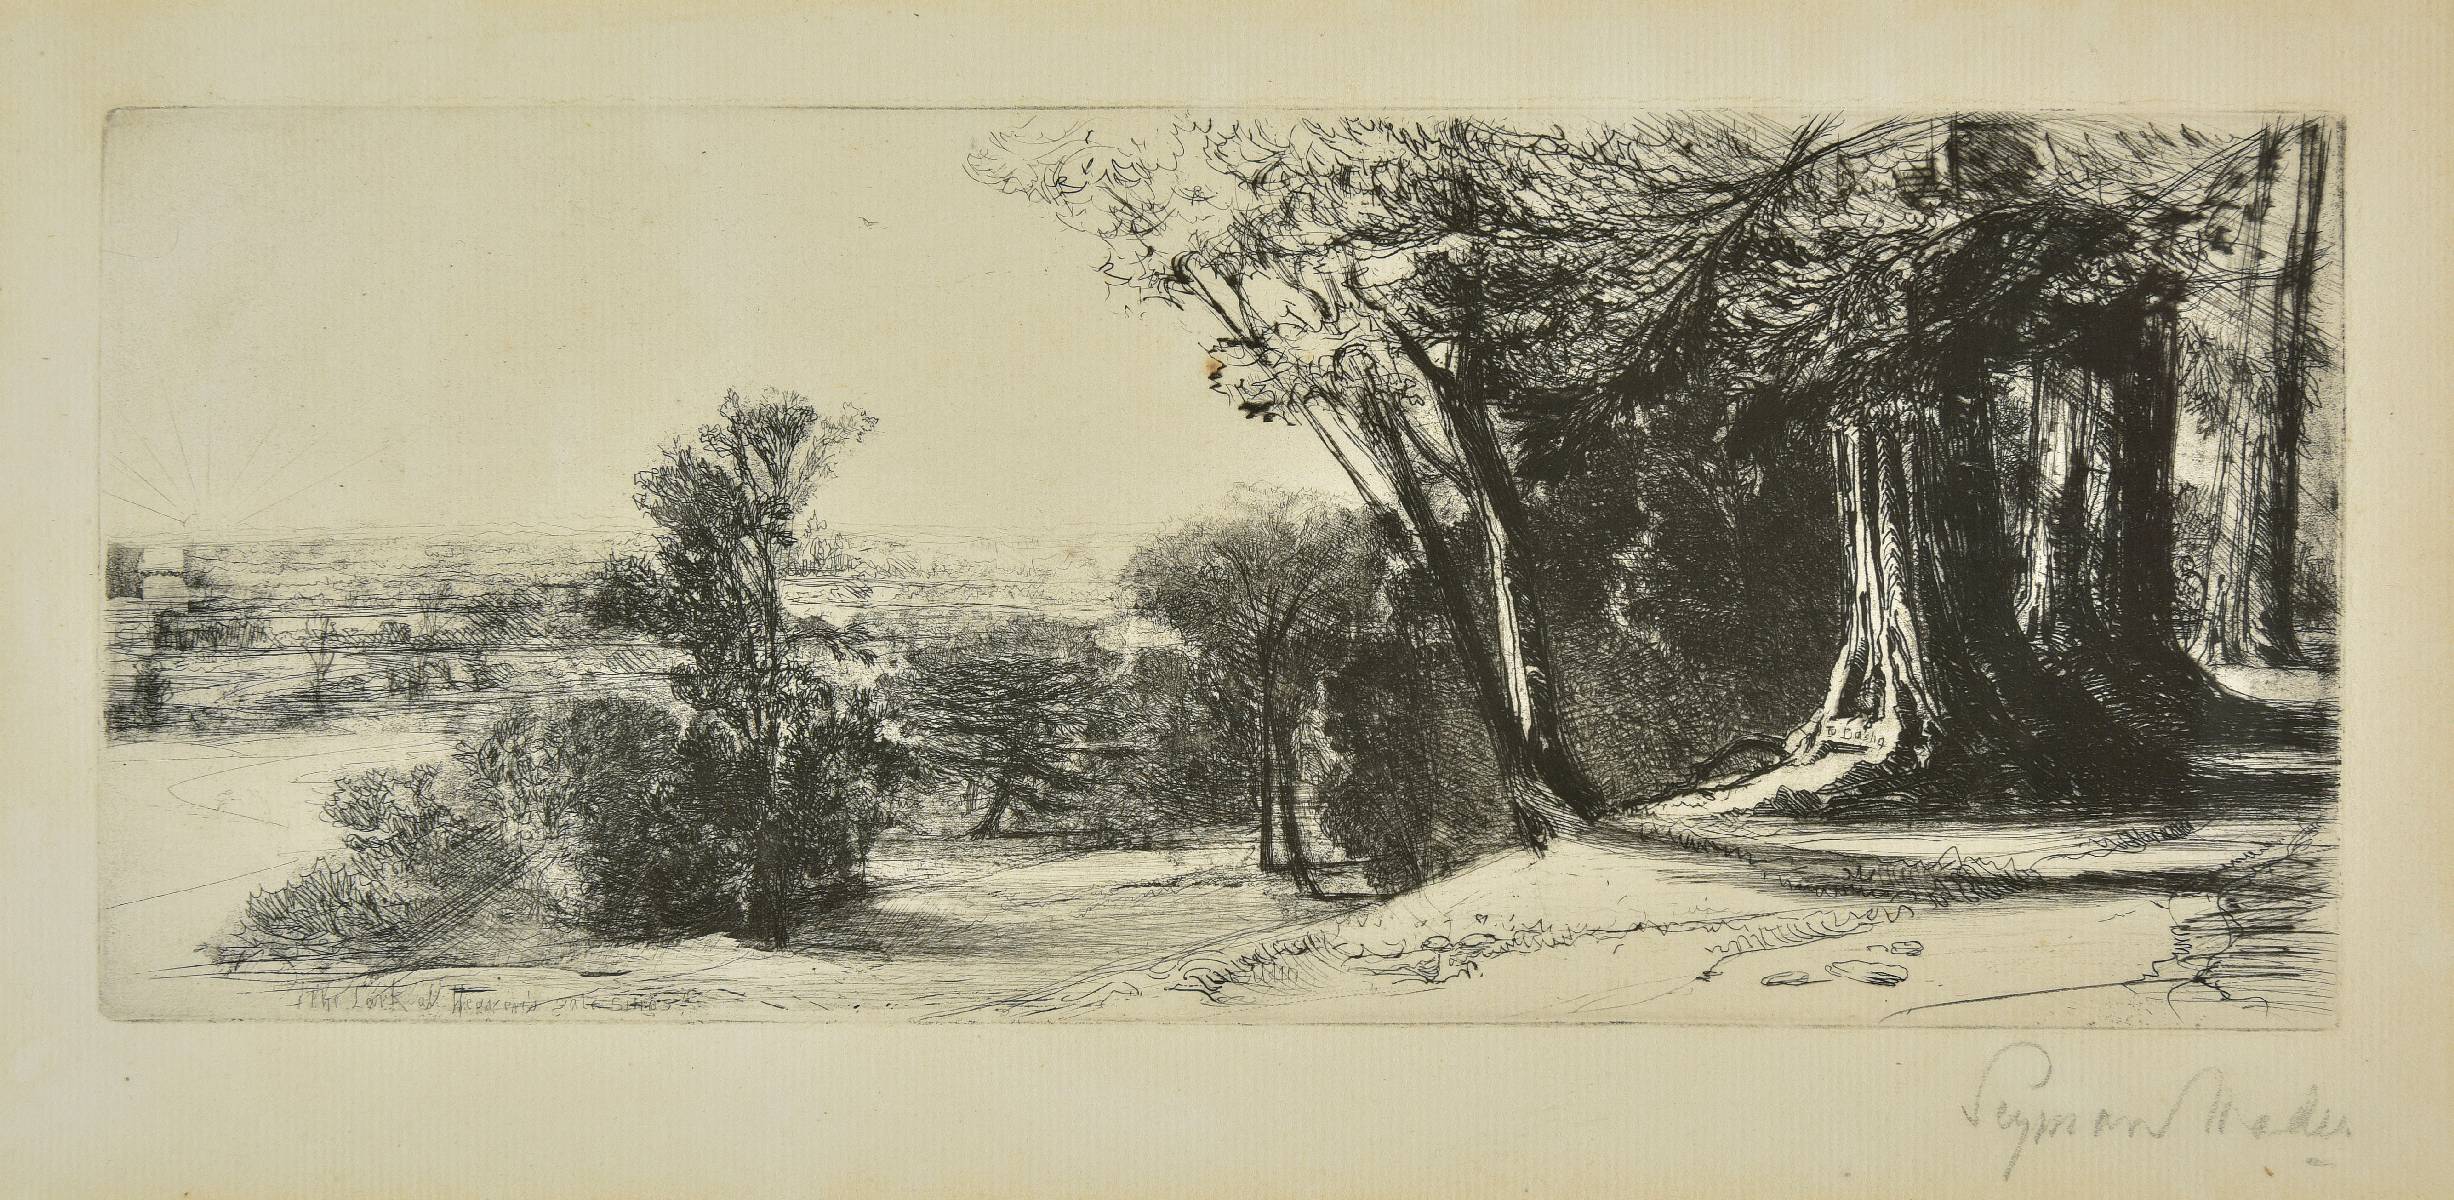 *Haden (Francis Seymour, 1818-1910 ). Early Morning, Richmond Park, 1859, etching and drypoint on